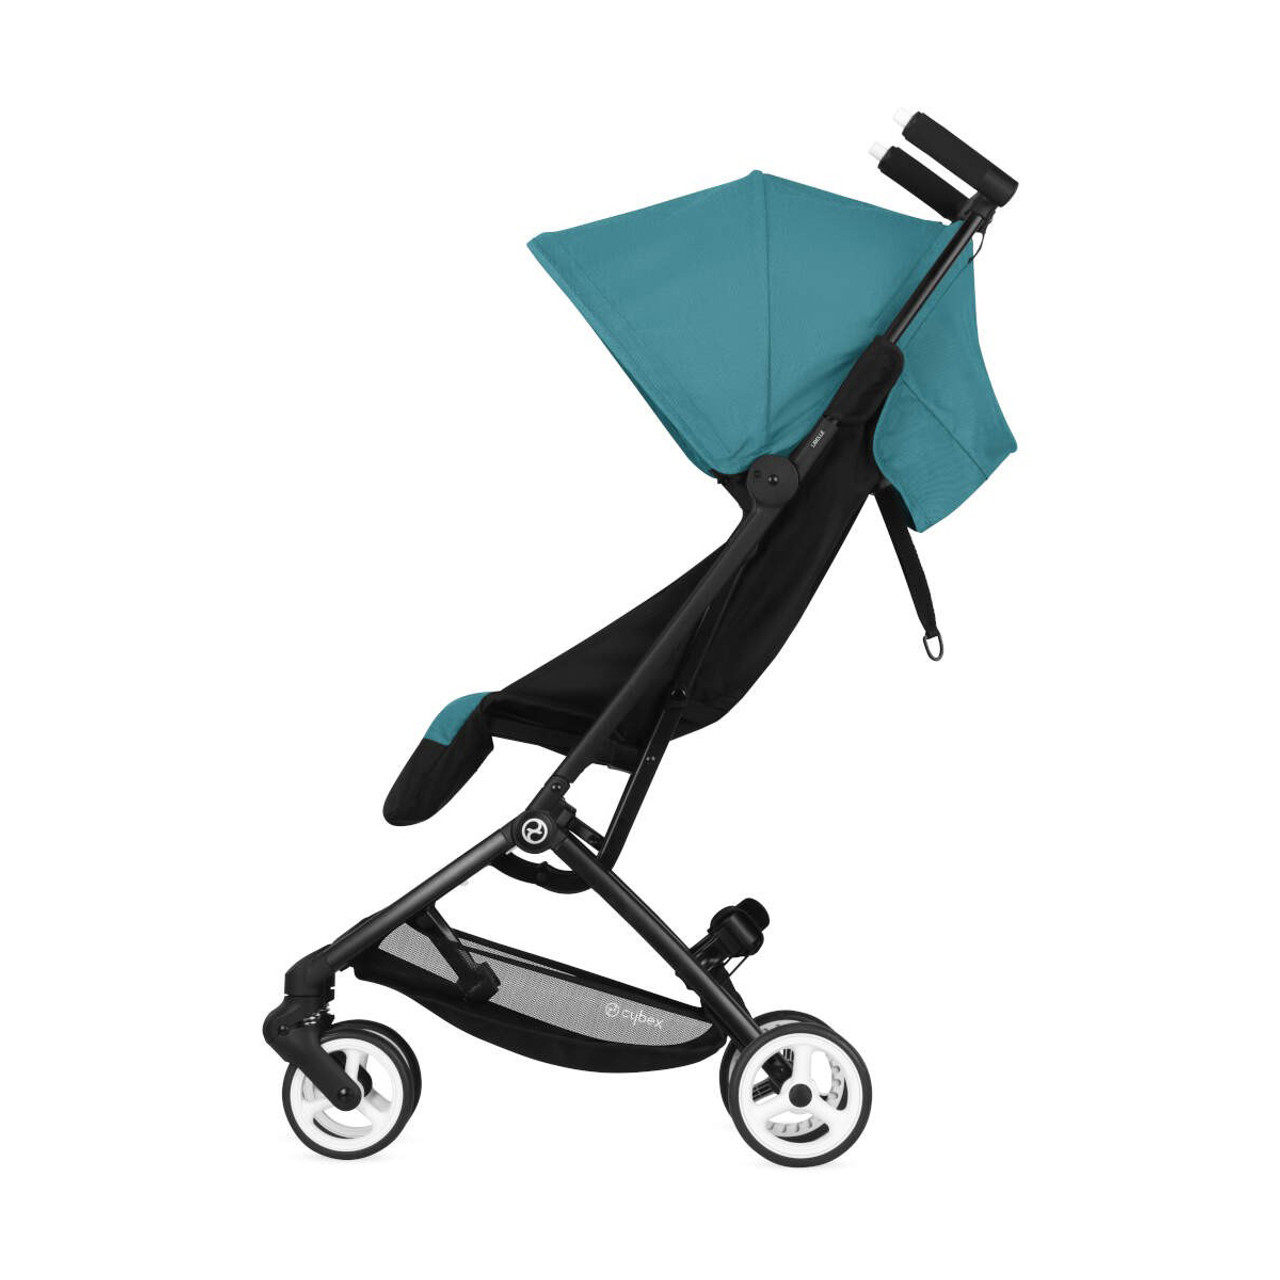 How to Recline the Seat, Libelle Stroller Tutorial